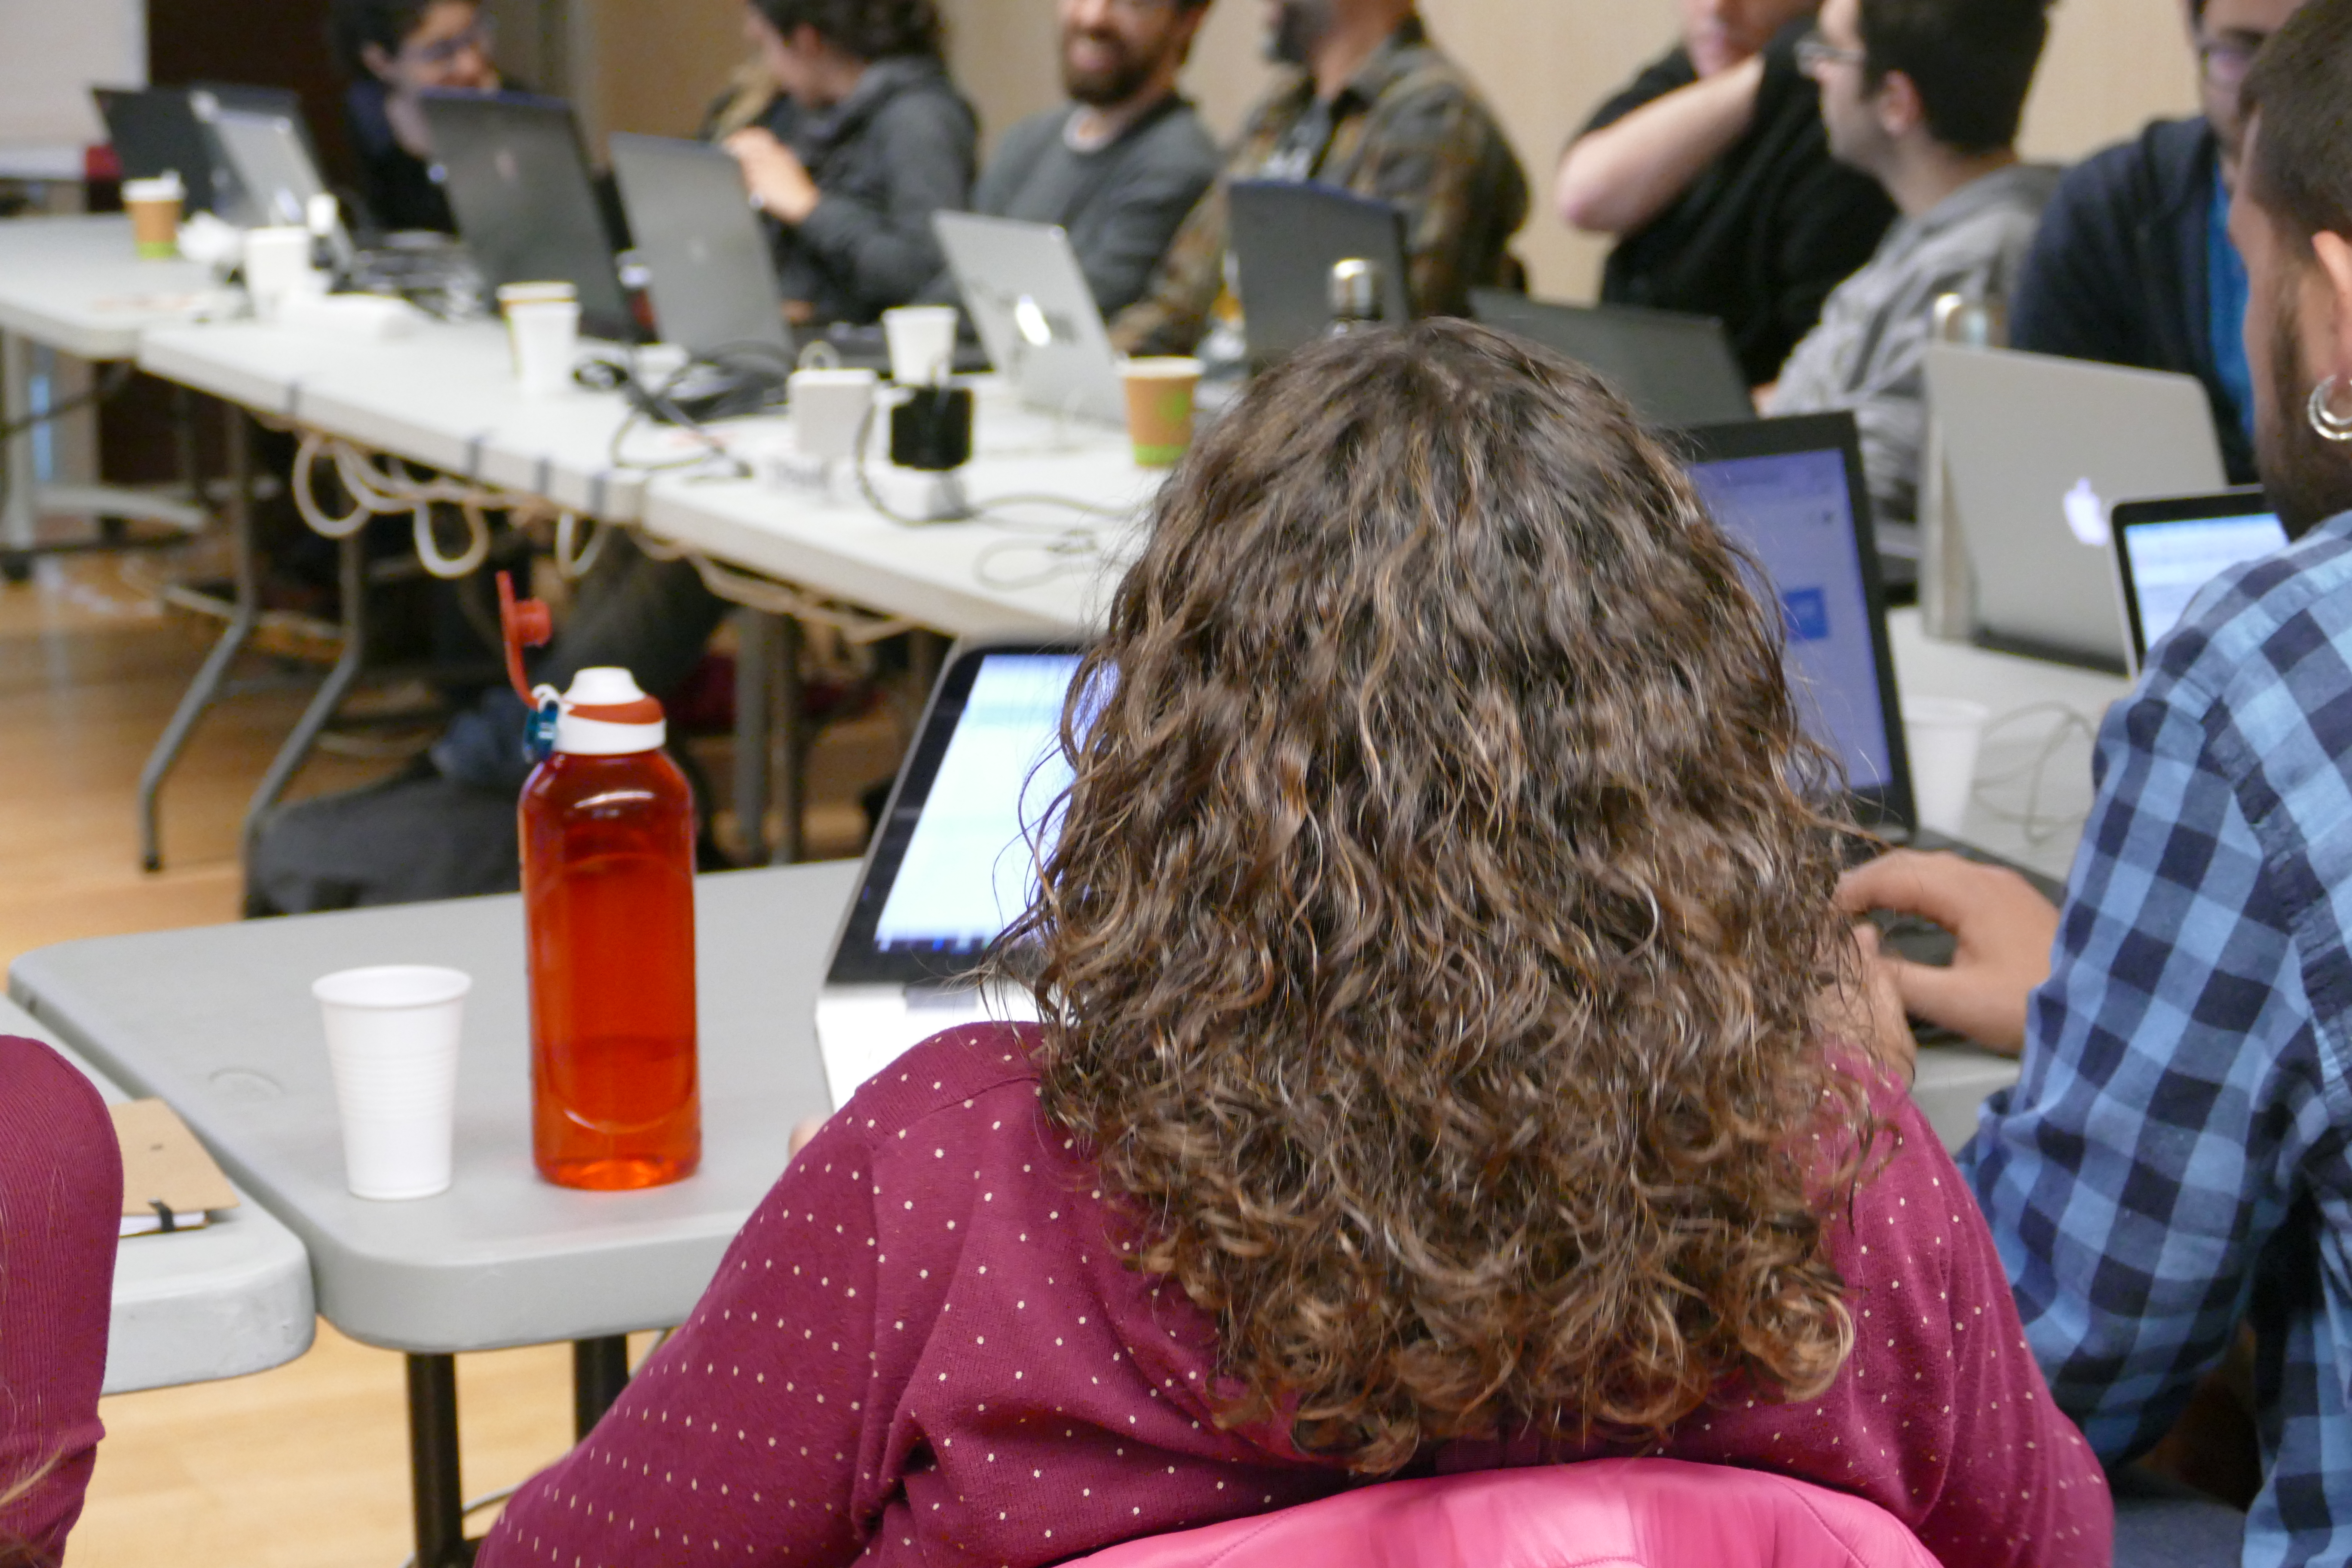 About 30 bioinformaticians participated in this workshop about reproducibility in computational research.